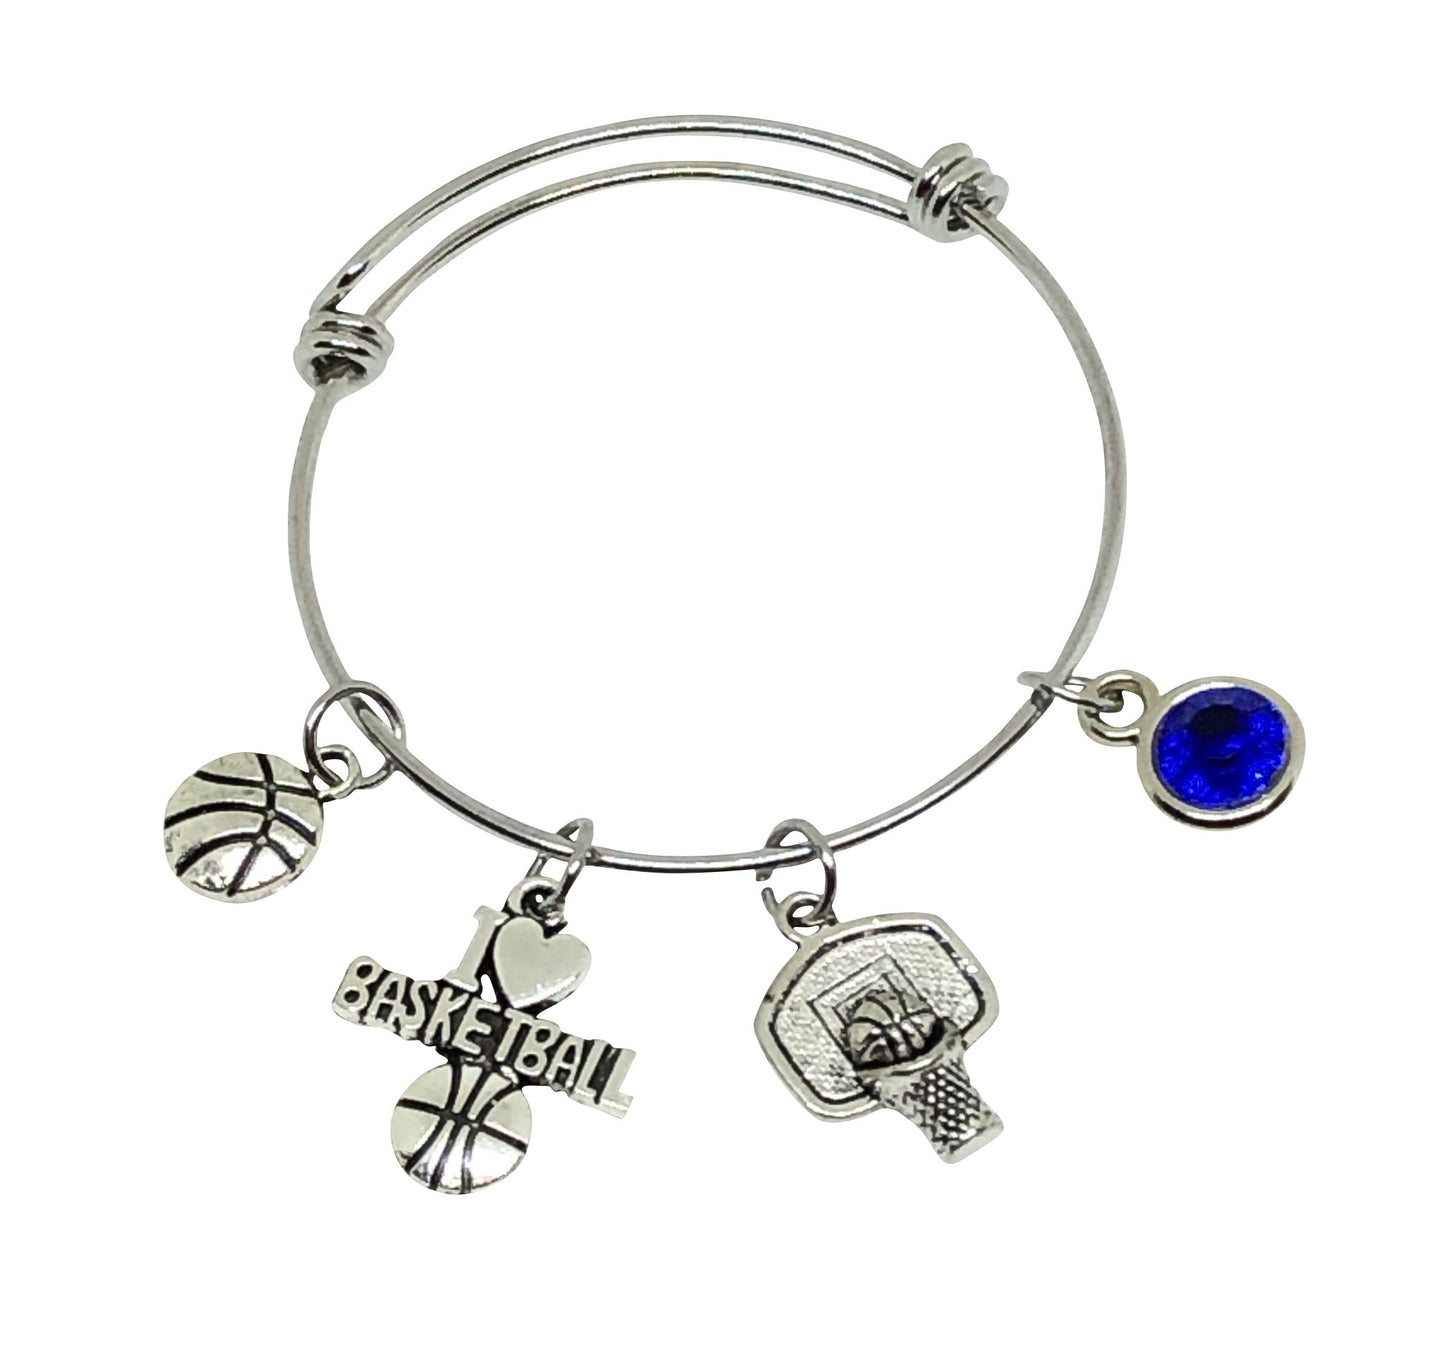 Load image into Gallery viewer, Basketball Charm Bracelet - I Love Basketball - Cheer and Dance On Demand
